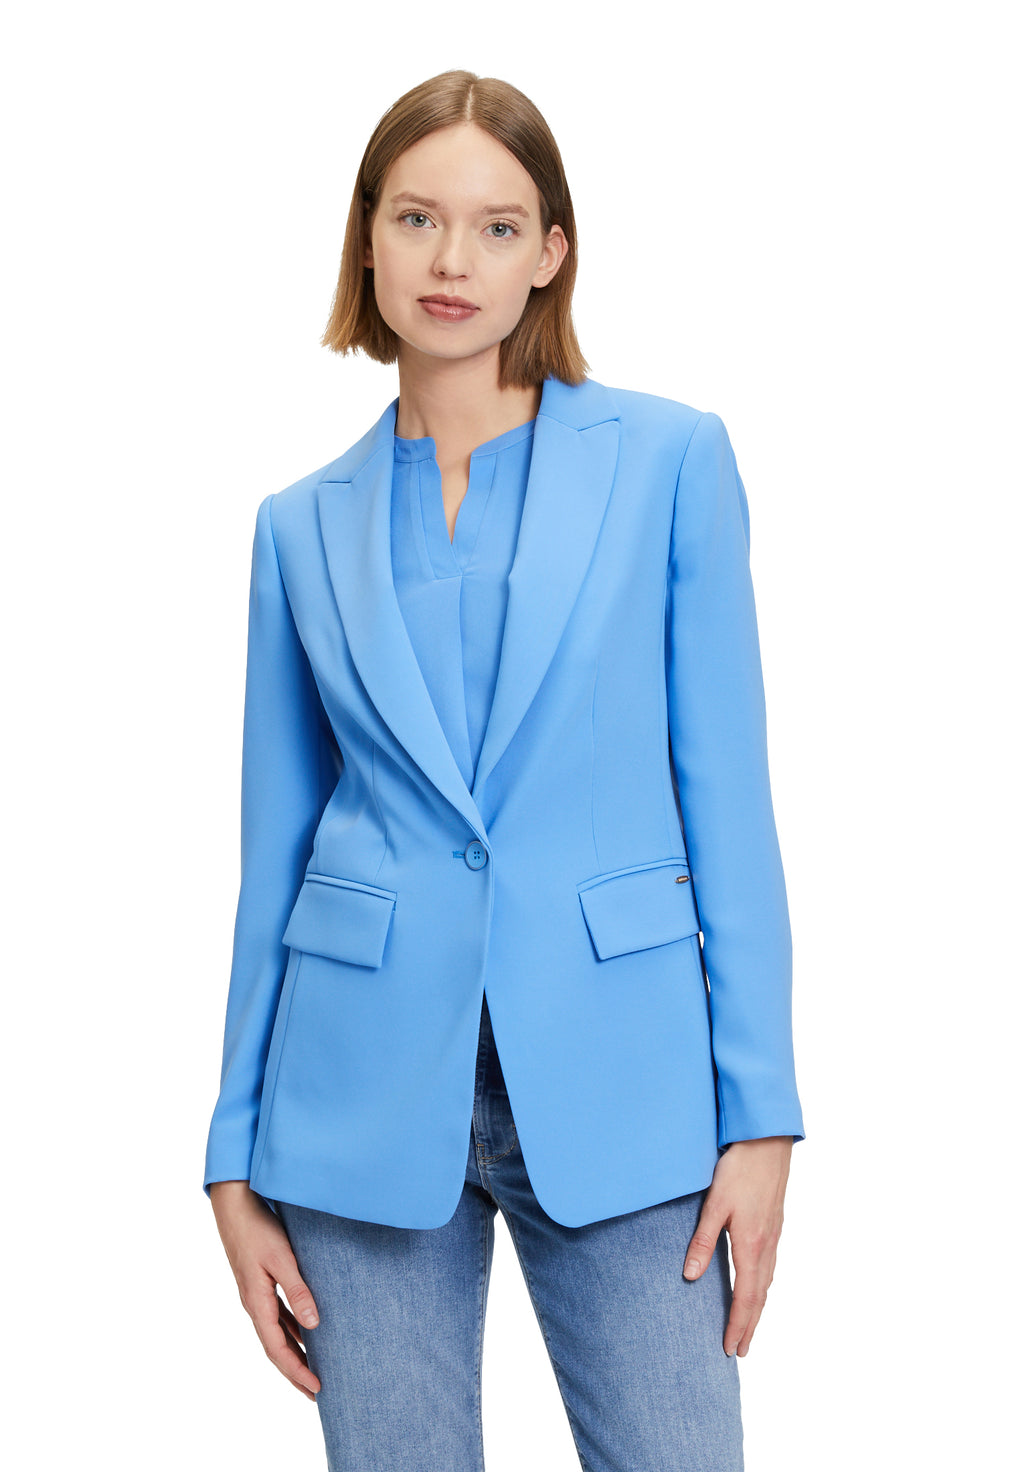 Betty & Co button blazer in blue

Product code 4184/3101